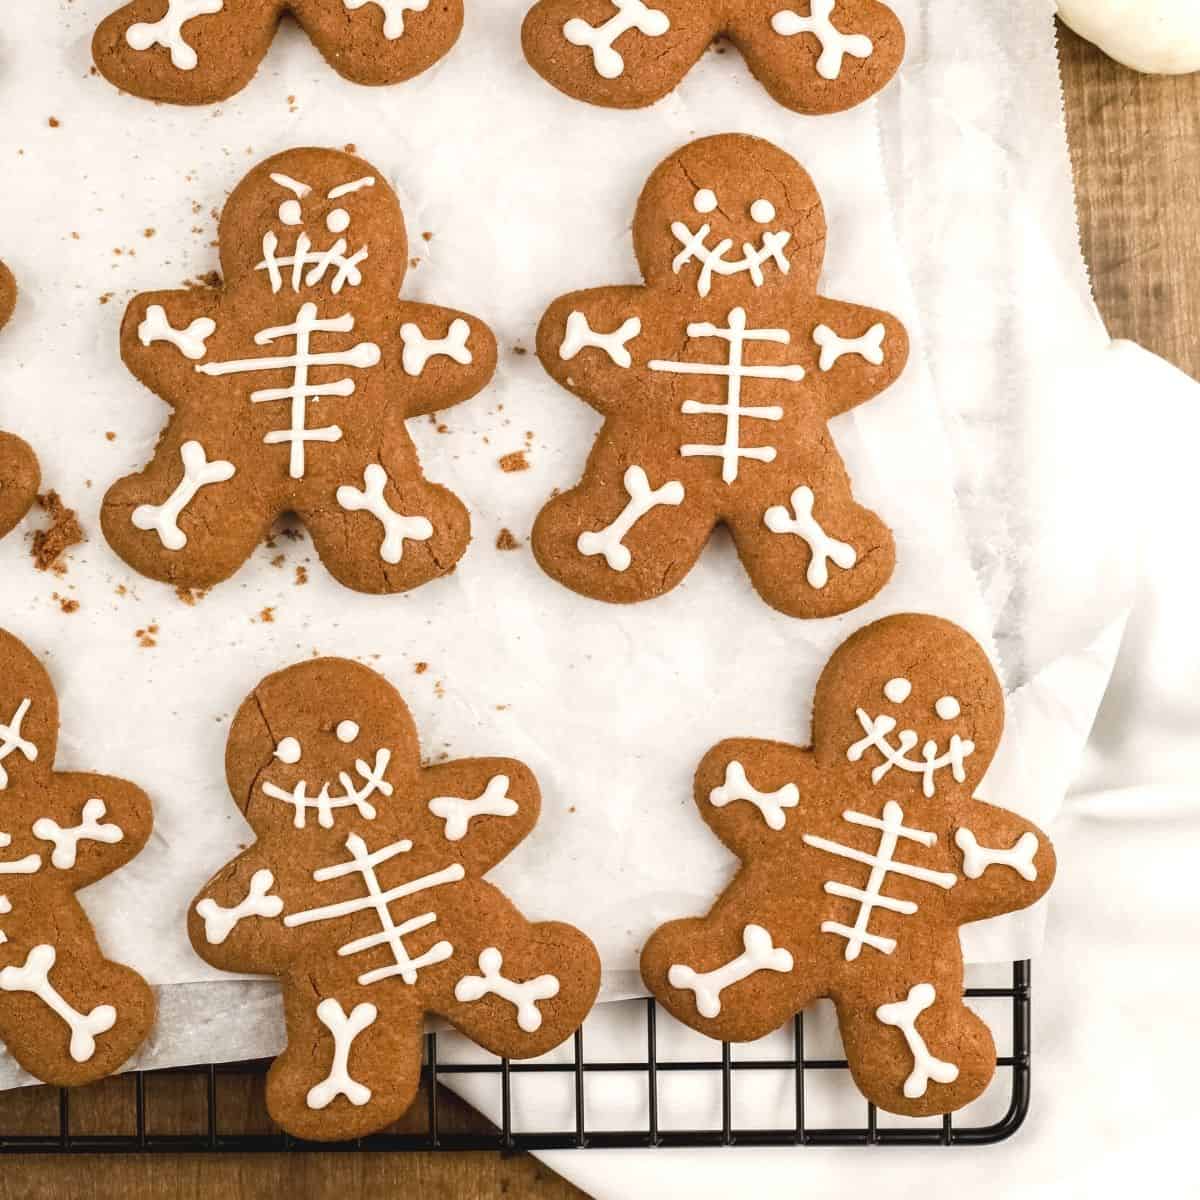 chocolate skeleton cookies are on a white parchment paper on a cooling rack